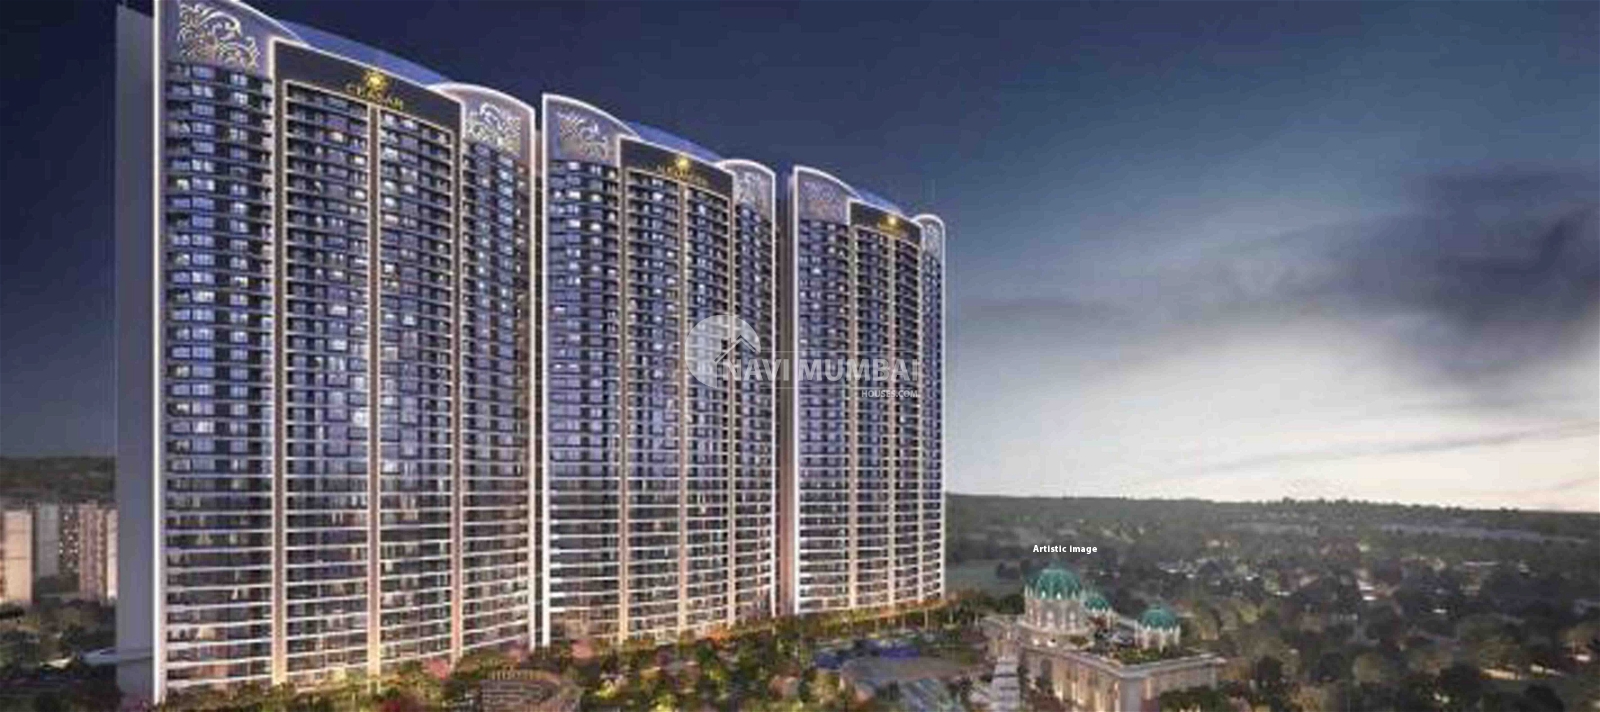 1 bhk new property in panvel, 2 bhk new property in panvel, 3 bhk new property in panvel, new property in panvel, property in panvel, 1 bhk flat in panvel, 2 bhk flat in panvel, 3 bhk flat in panvel, navimumbai.